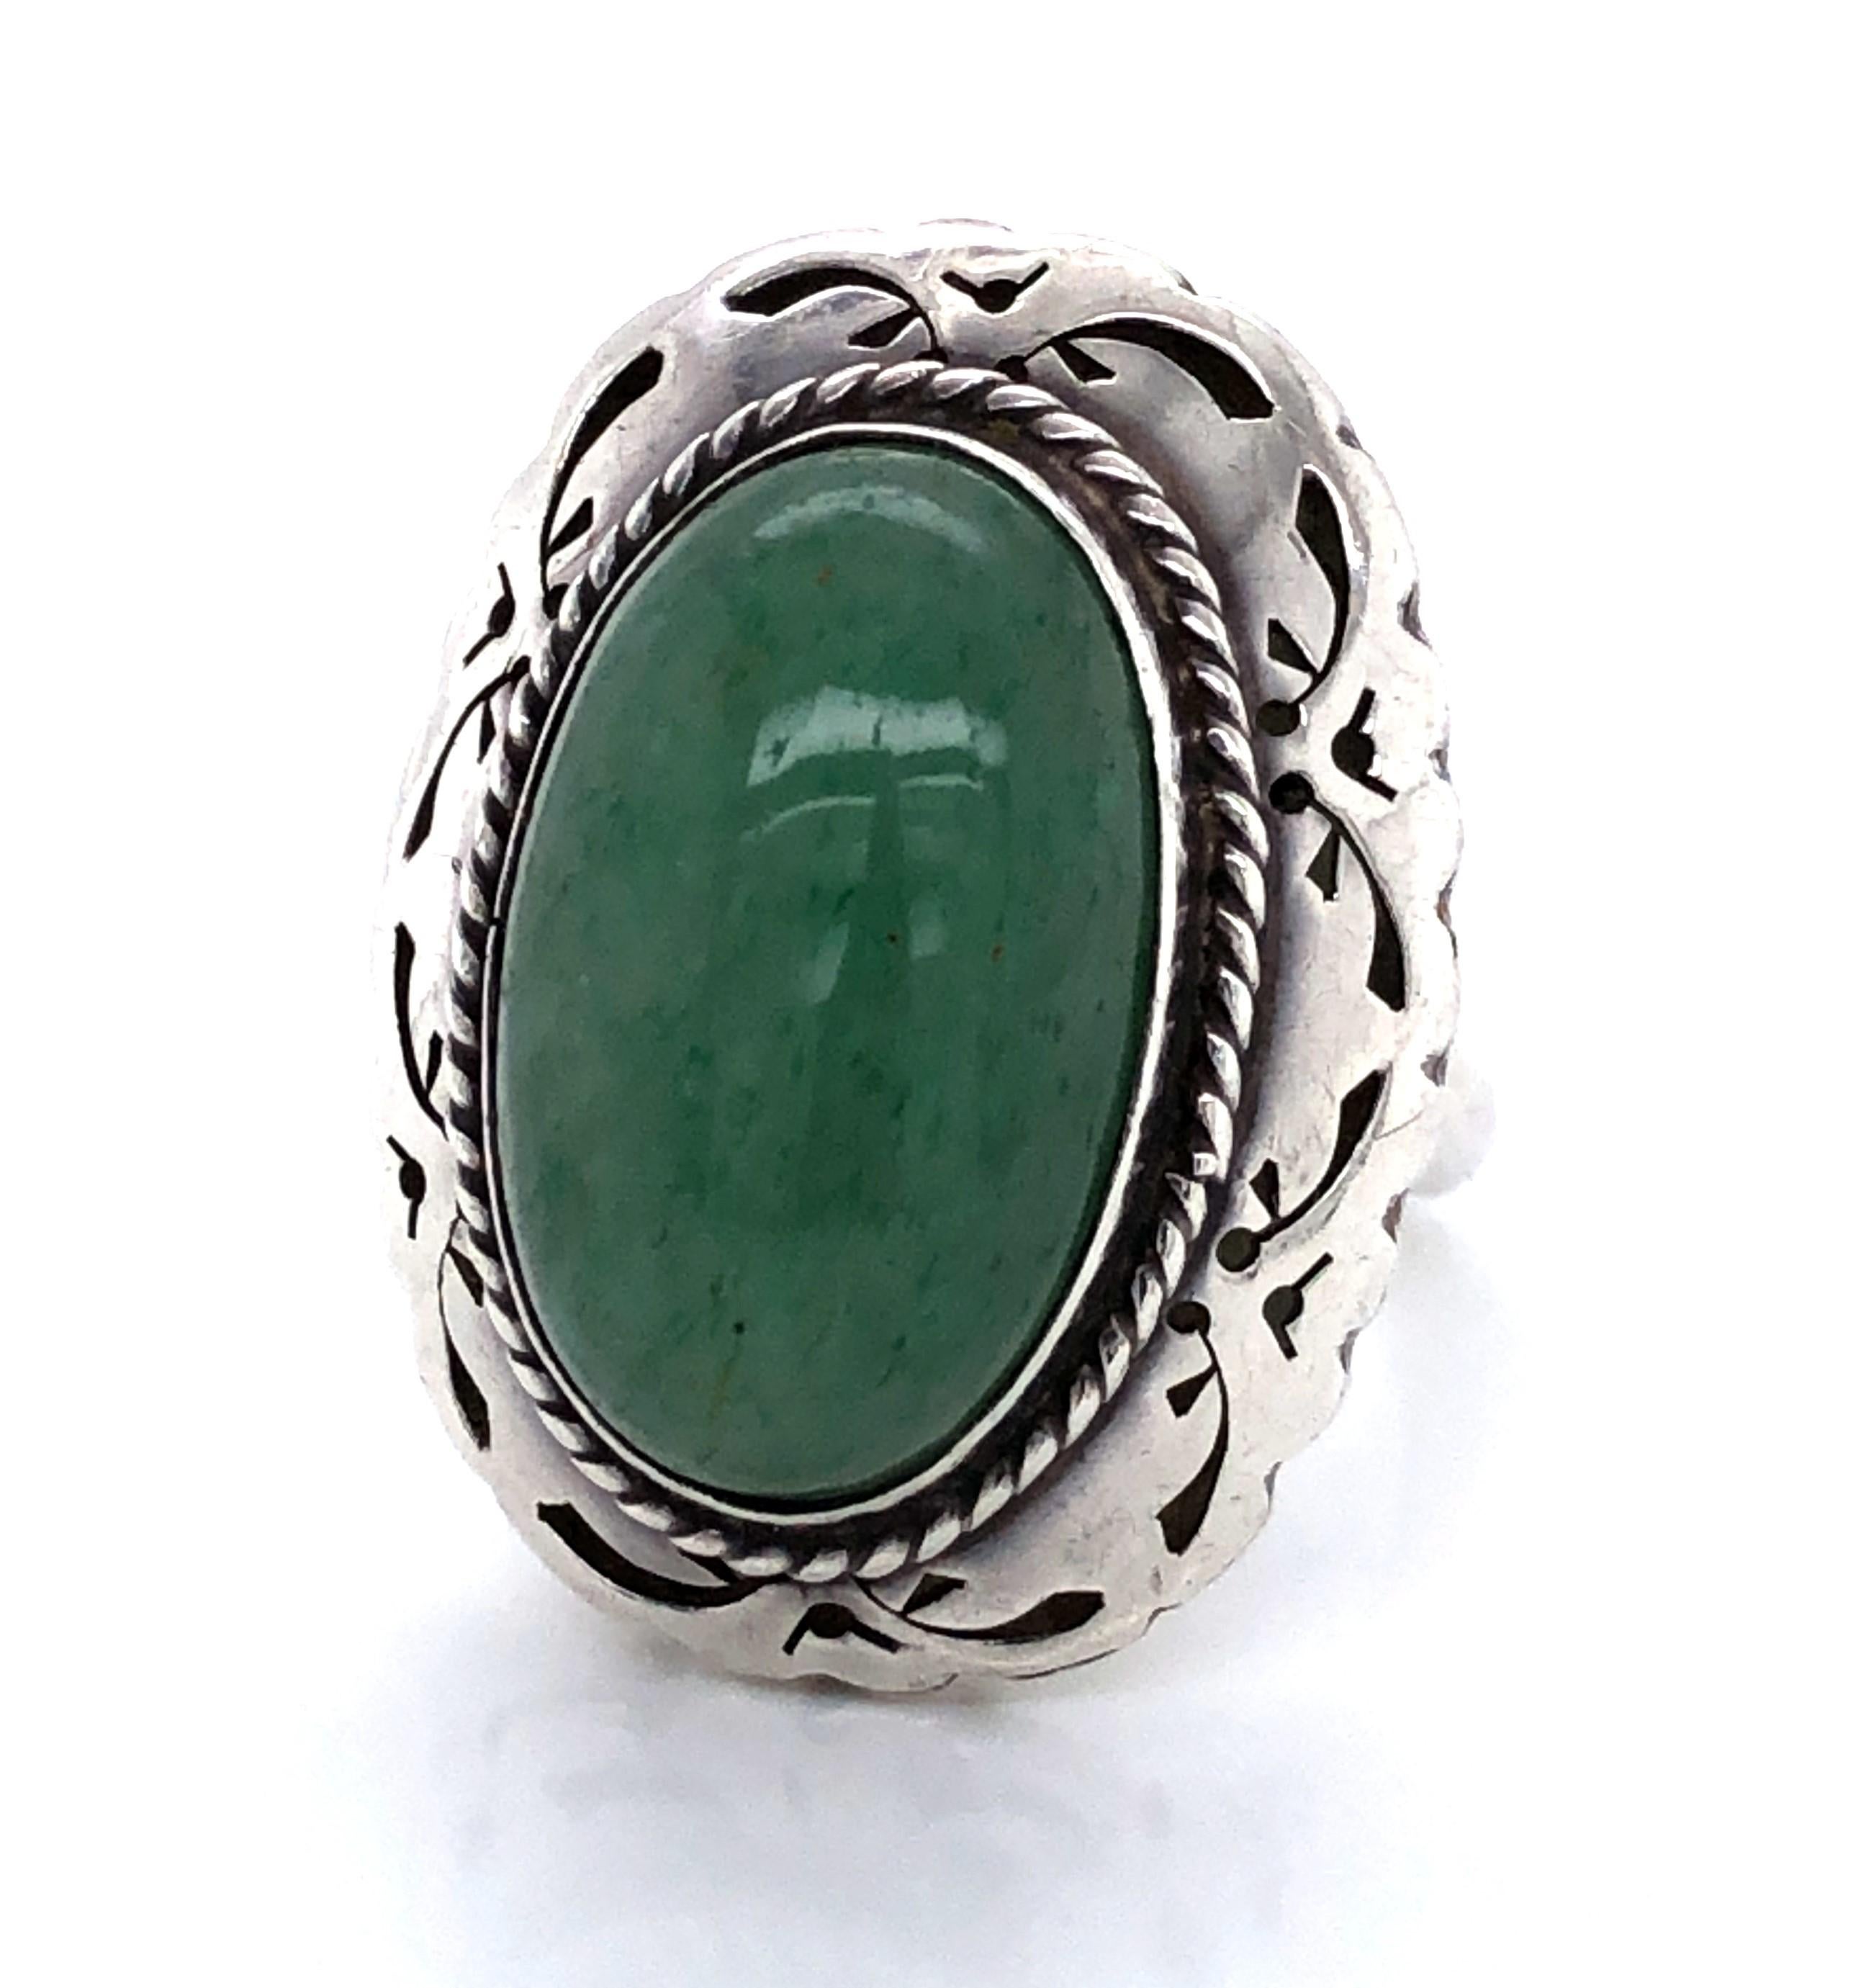 A large polished green turquoise cabochon is the focal point of this Southwest style statement ring. The over five carat oval stone, measuring 12 x 20mm, sits proudly on the reticulated raised sterling silver ring head which is decorated with silver